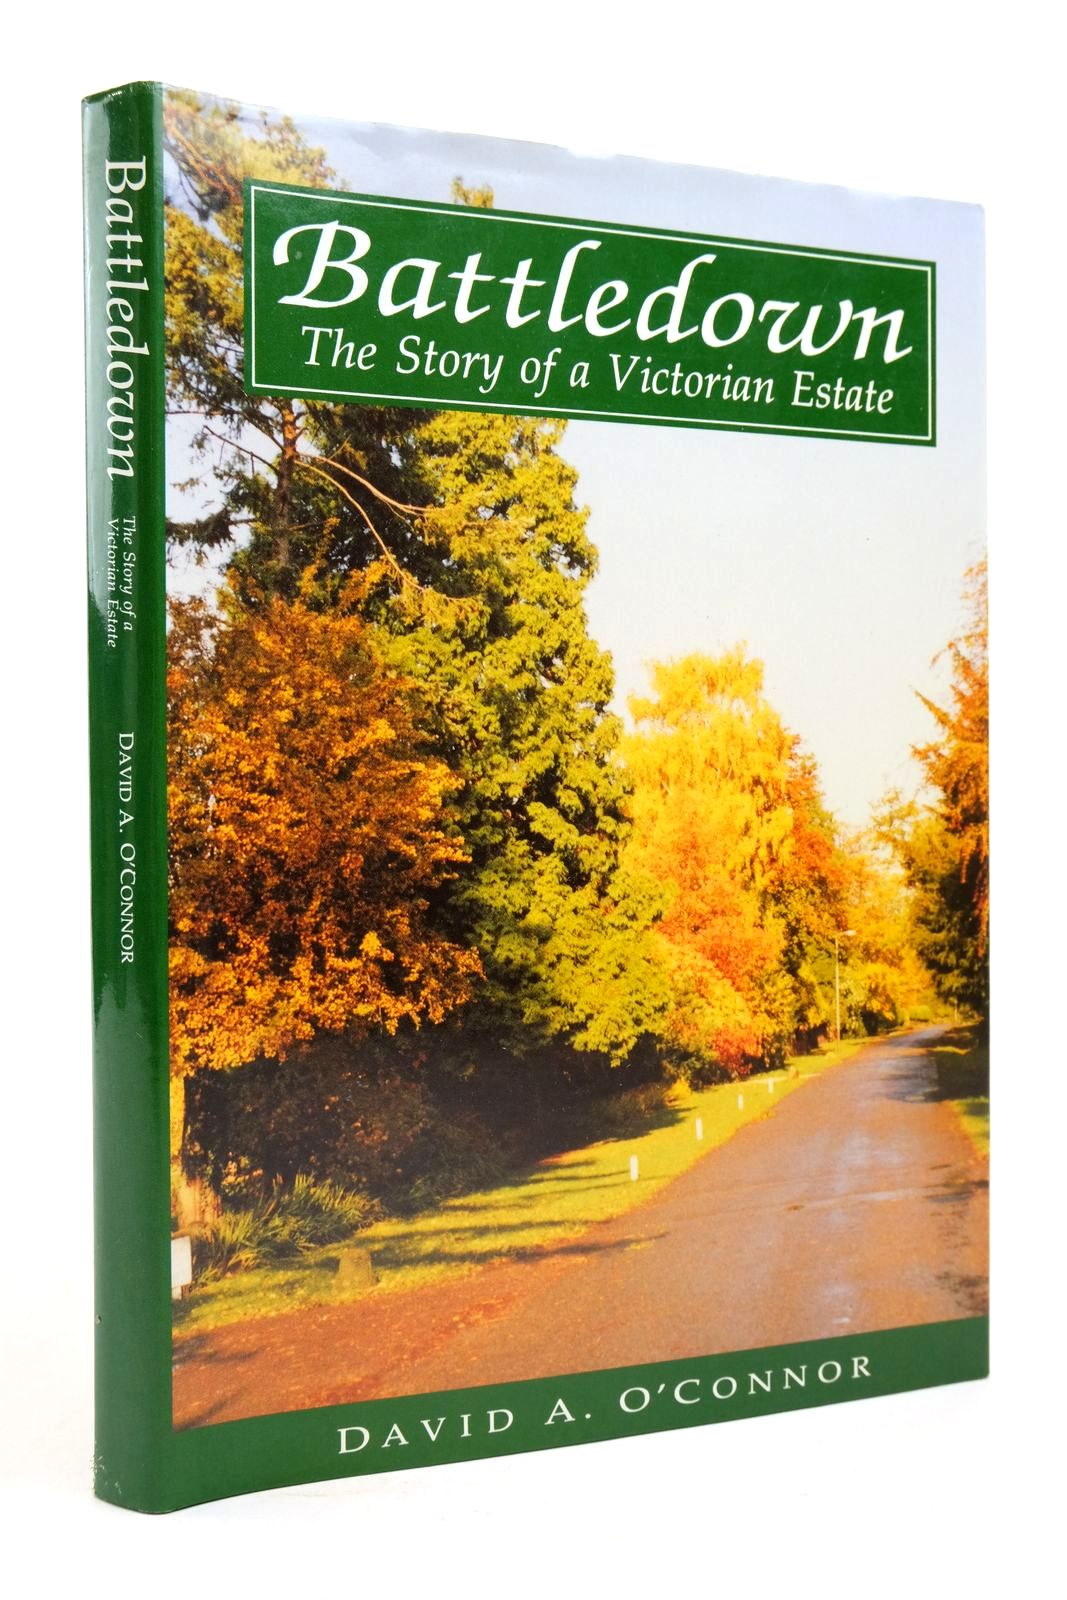 Photo of BATTLEDOWN: THE STORY OF A VICTORIAN ESTATE- Stock Number: 2140792